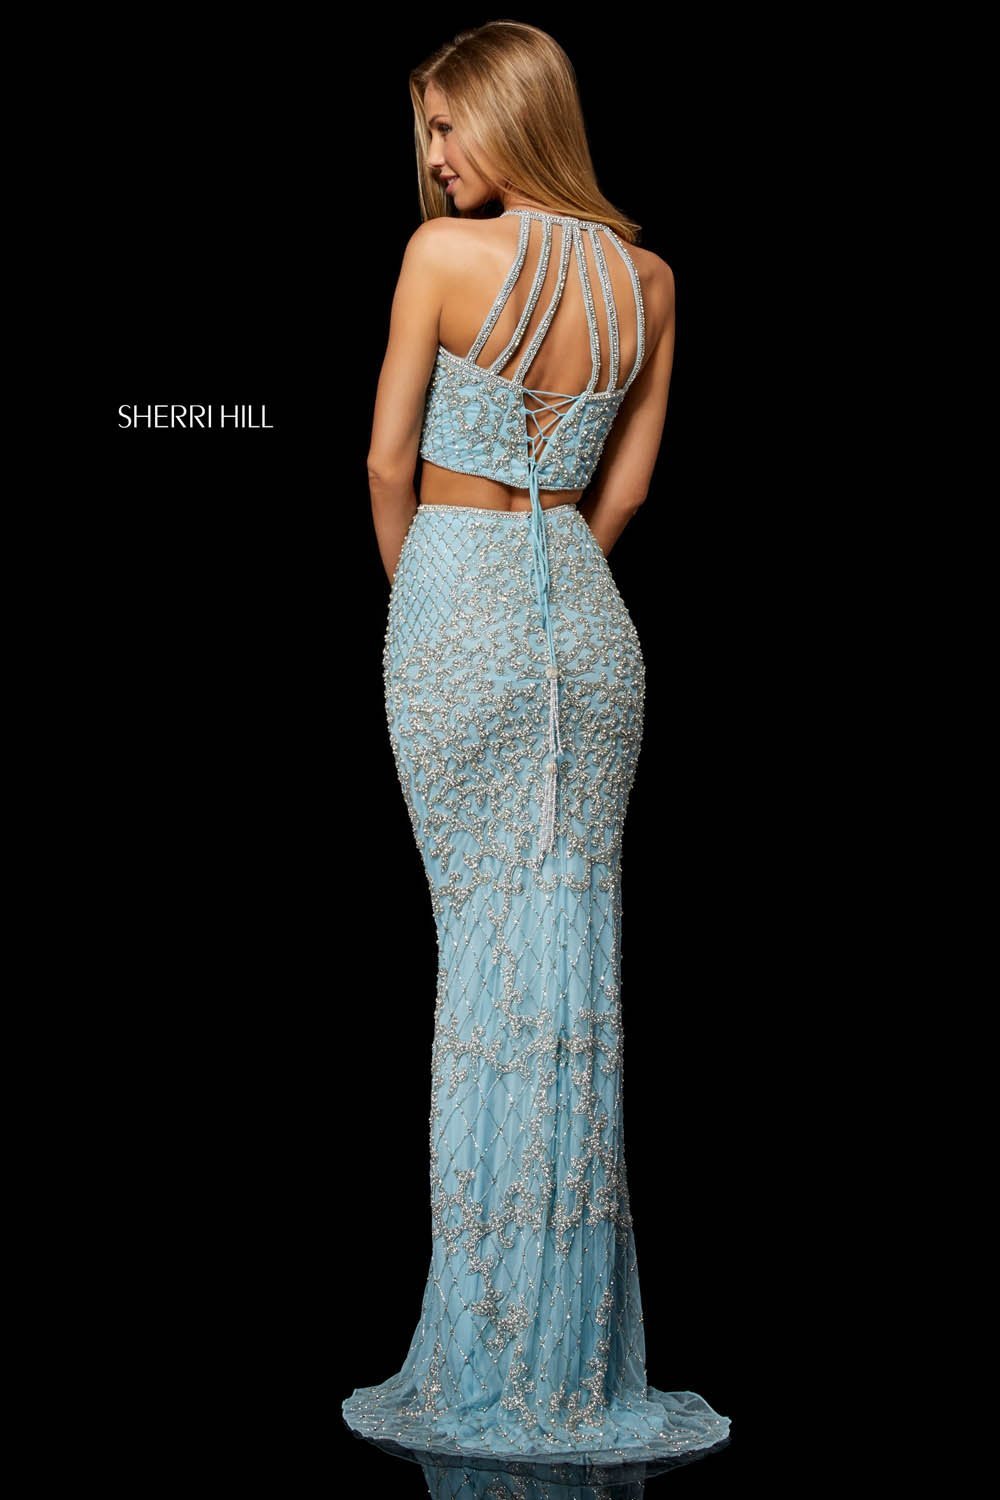 Sherri Hill 52088 dress images in these colors: Ivory, Light Blue, Black, Nude, Navy, Burgundy, Blush, Periwinkle.